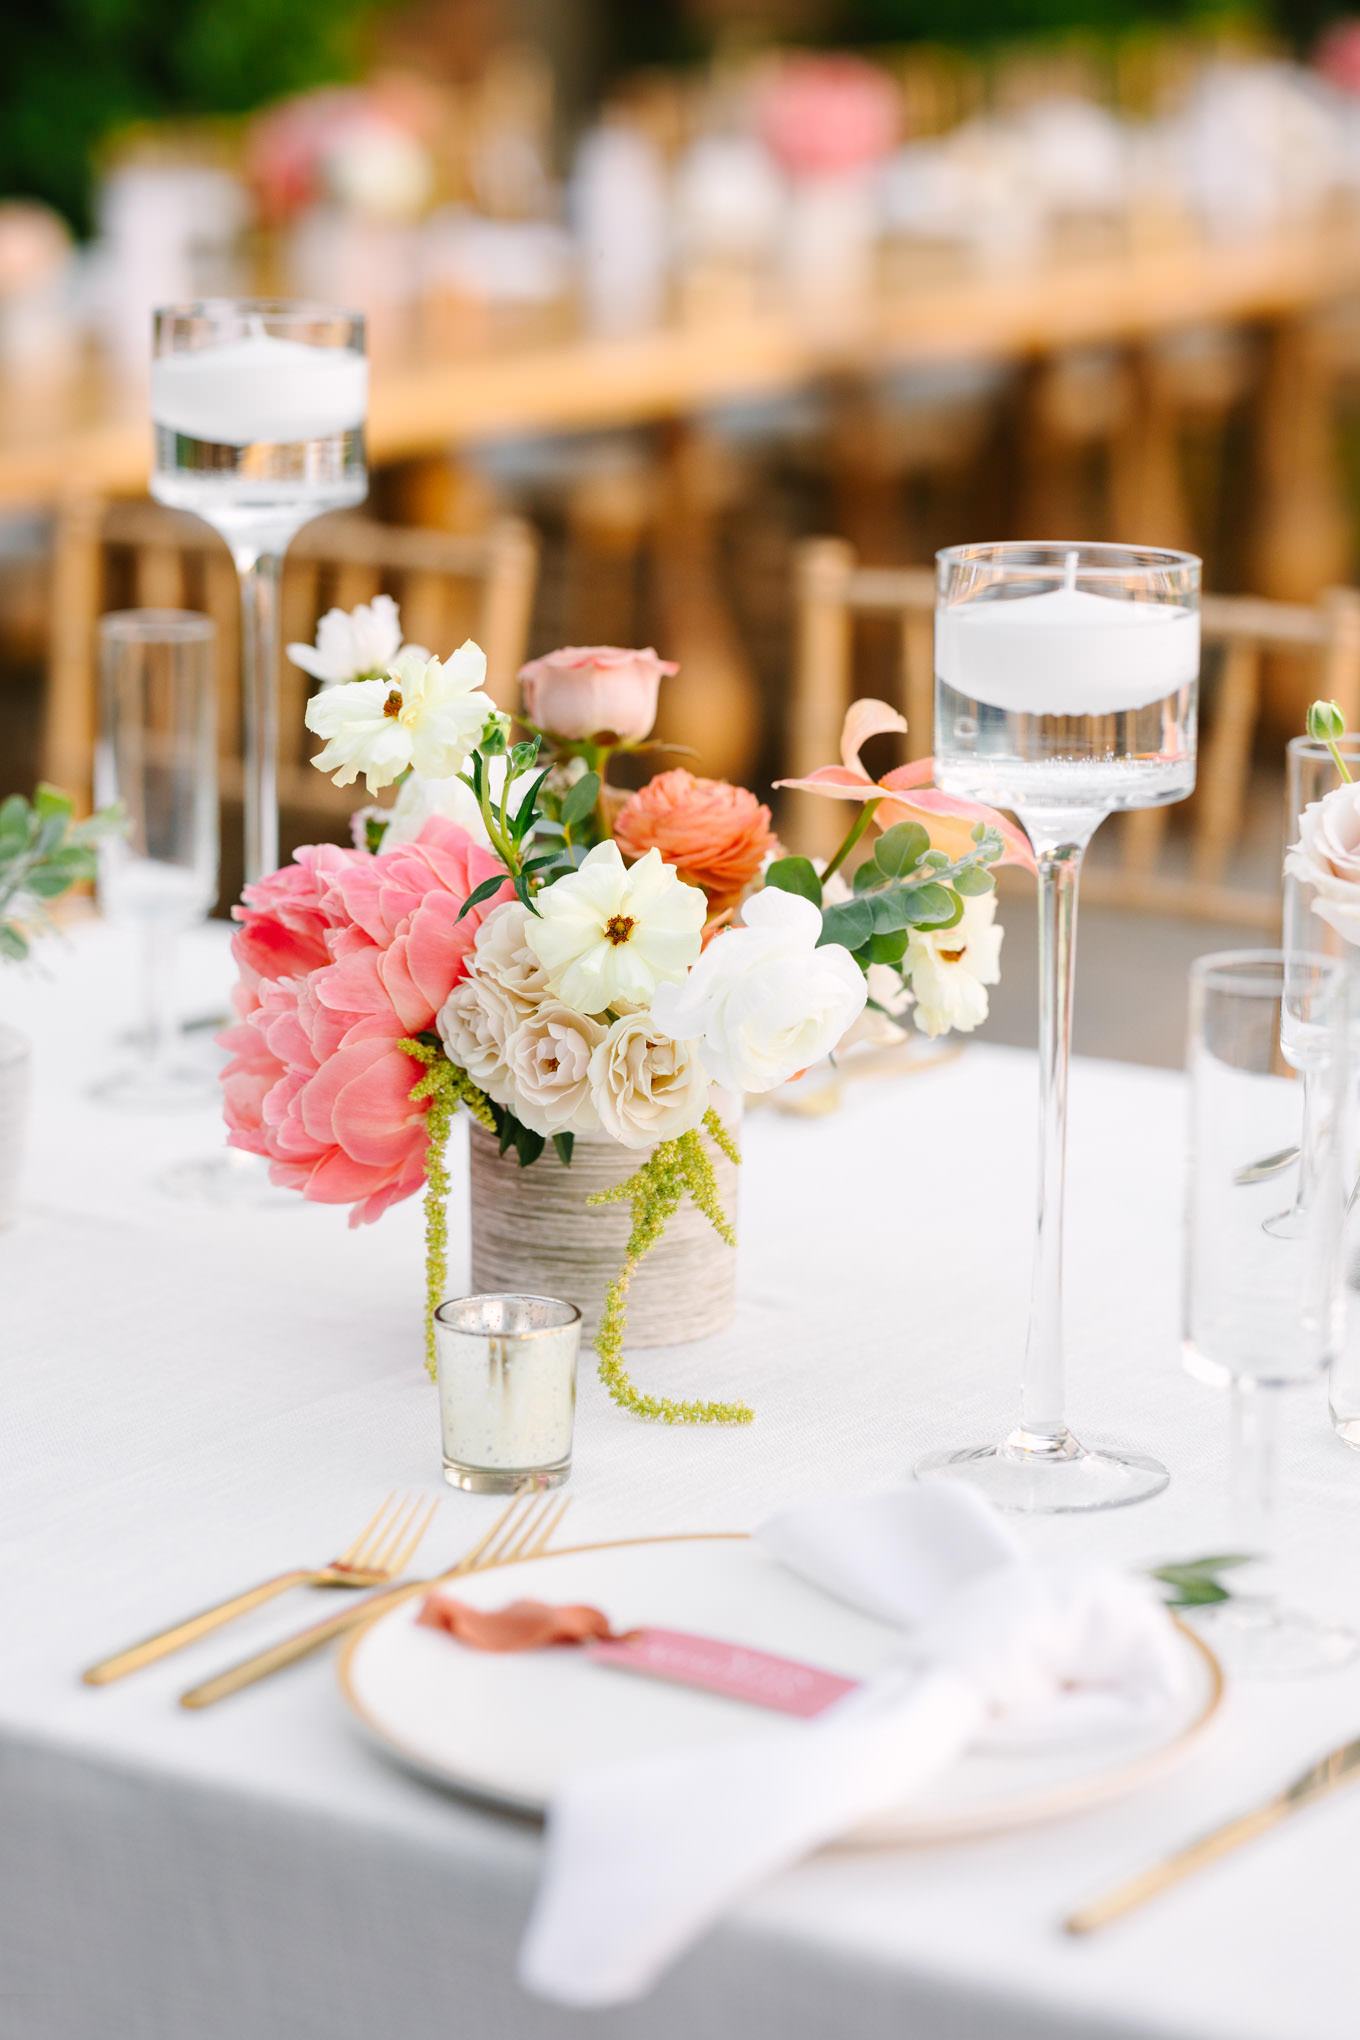 Tabletop centerpieces | Pink Bougainvillea Estate wedding | Colorful LA wedding photography | #bougainvilleaestate #palmspringswedding #palmspringsweddingvenue #palmspringsphotographer Source: Mary Costa Photography | Los Angeles